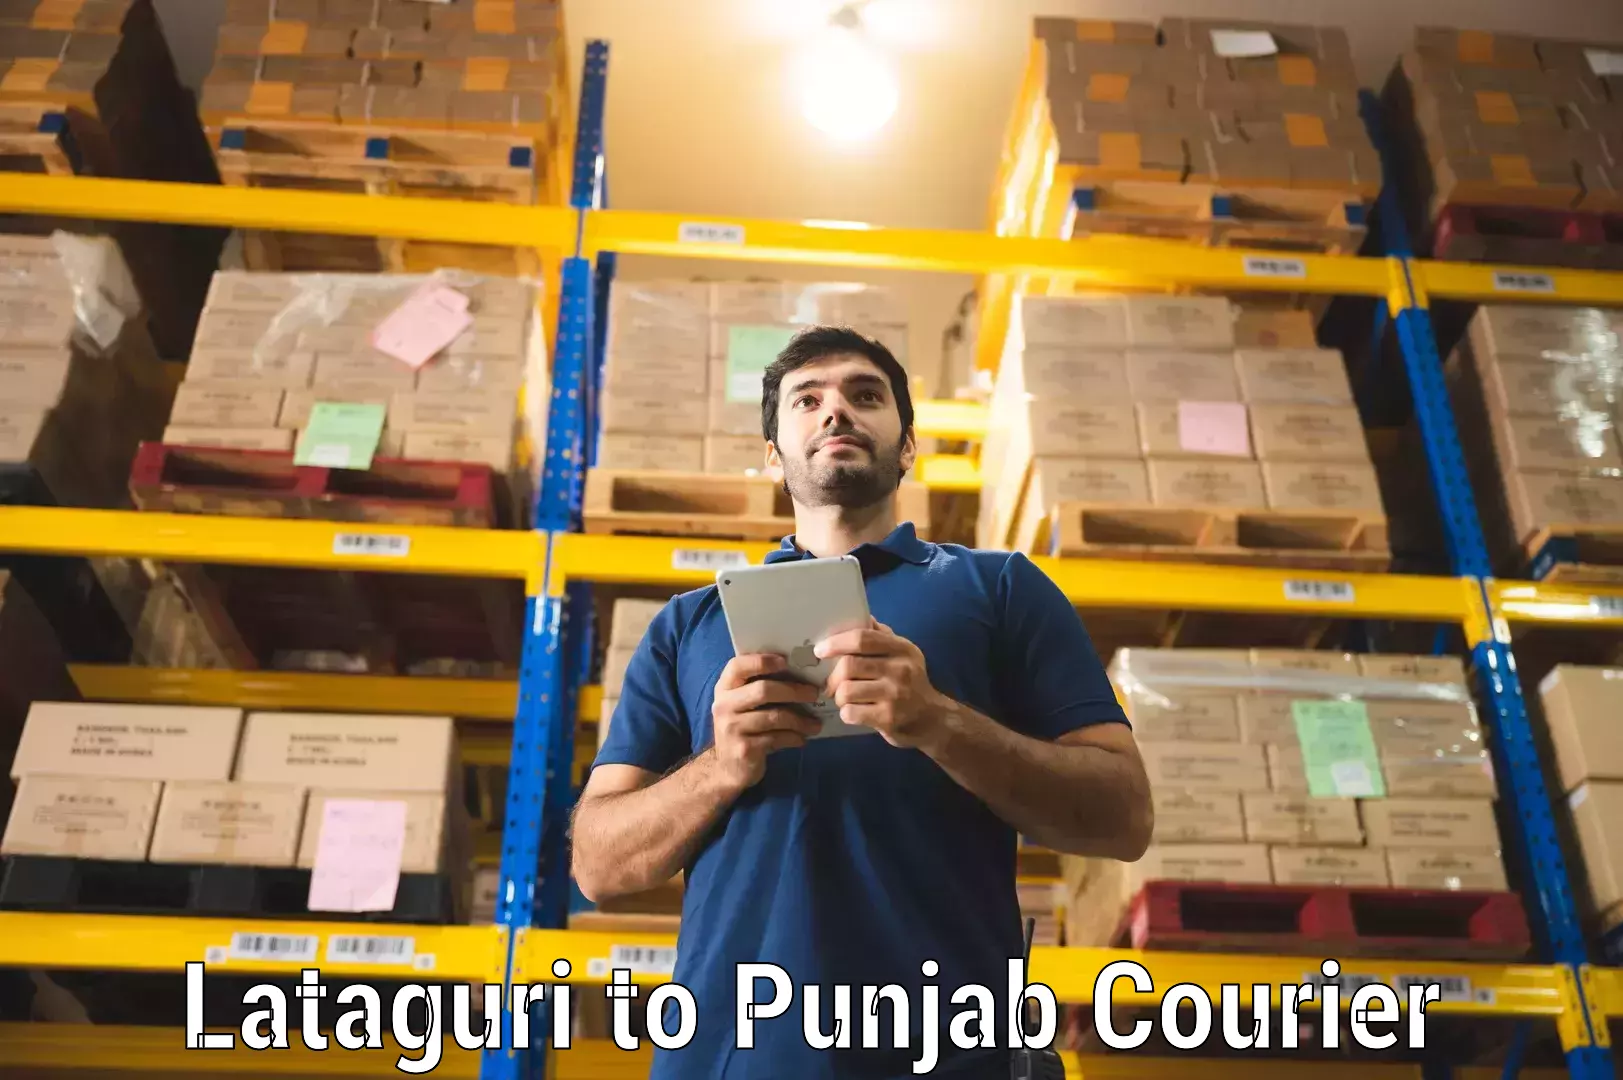 Nationwide delivery network Lataguri to Punjab